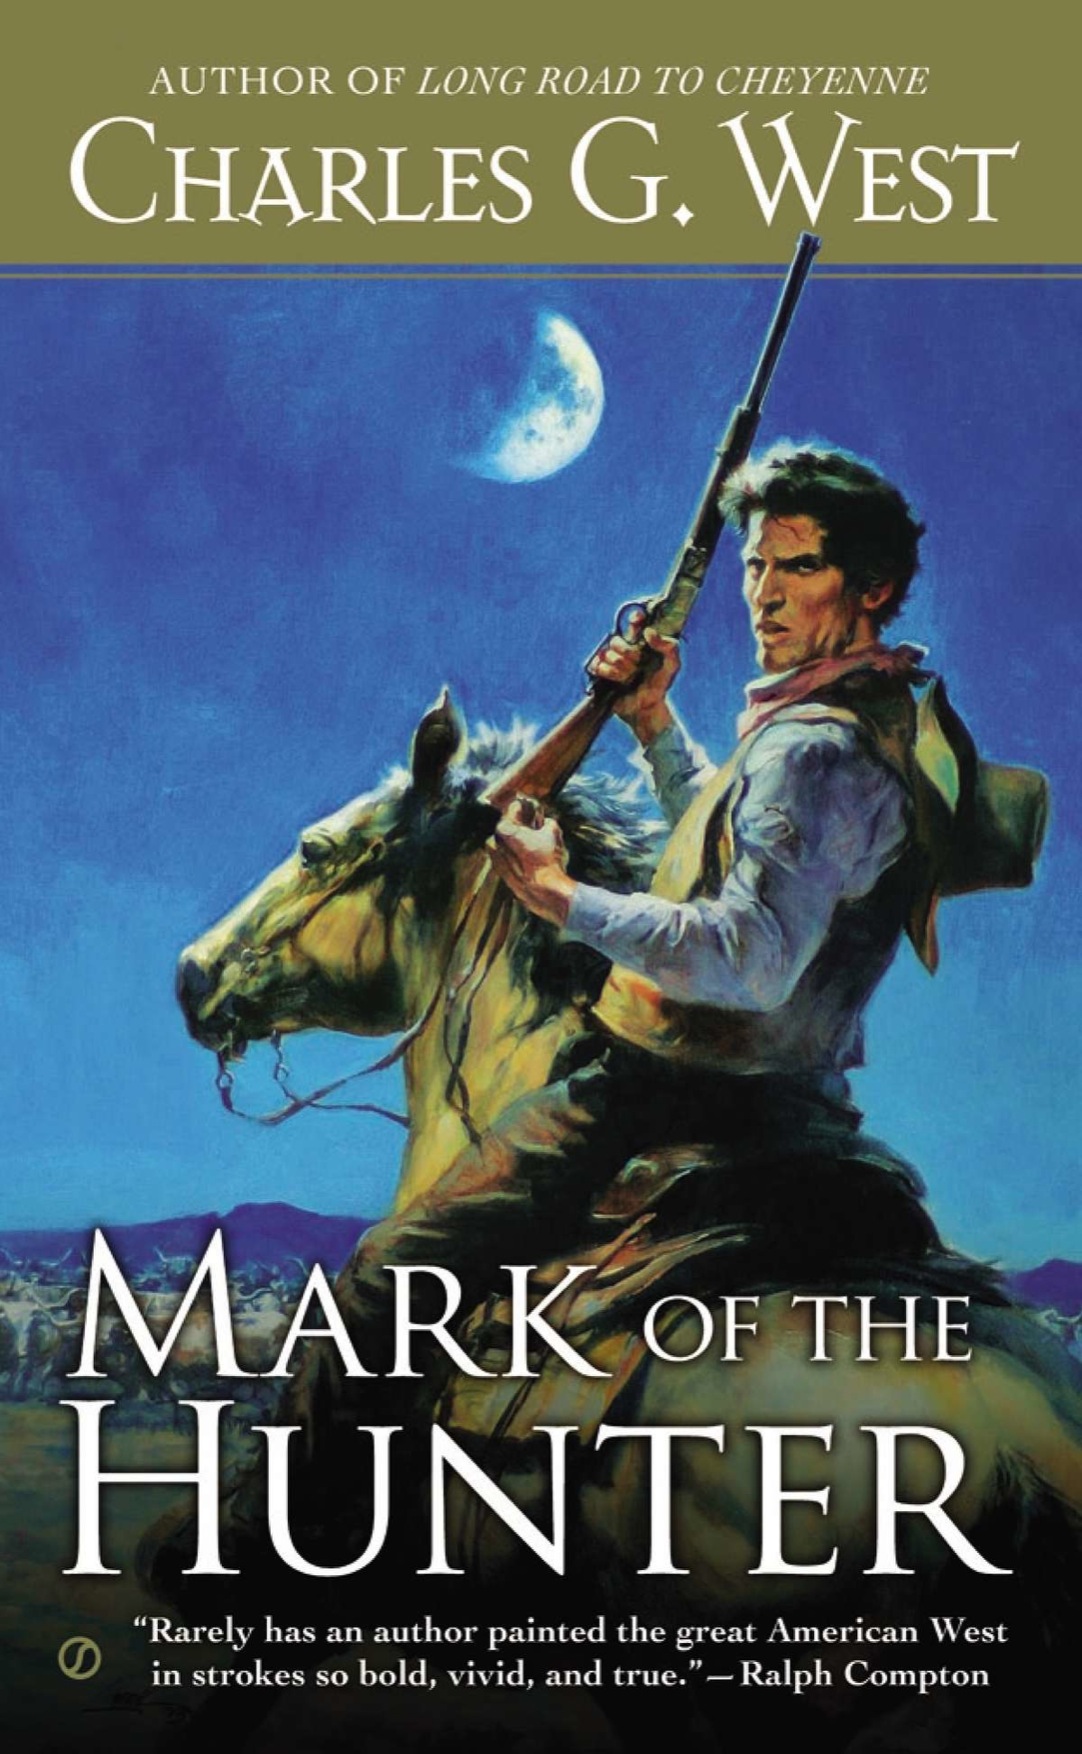 Mark of the Hunter (2013) by Charles G. West